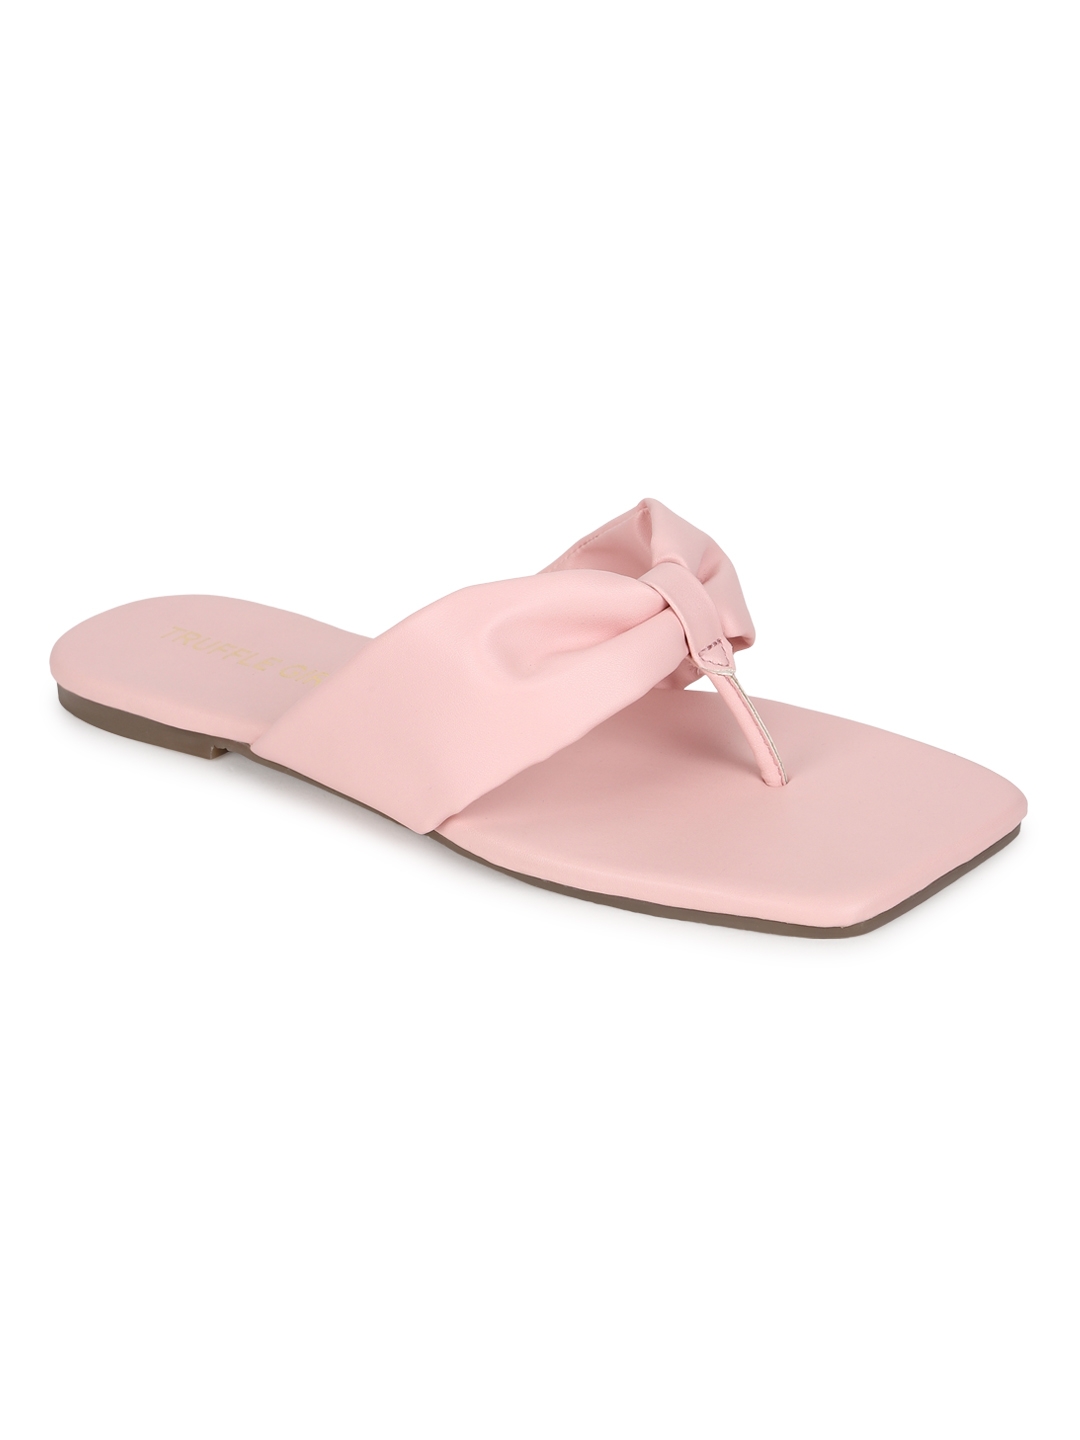 Truffle Collection | Baby Pink PU Flip Flop Slippers